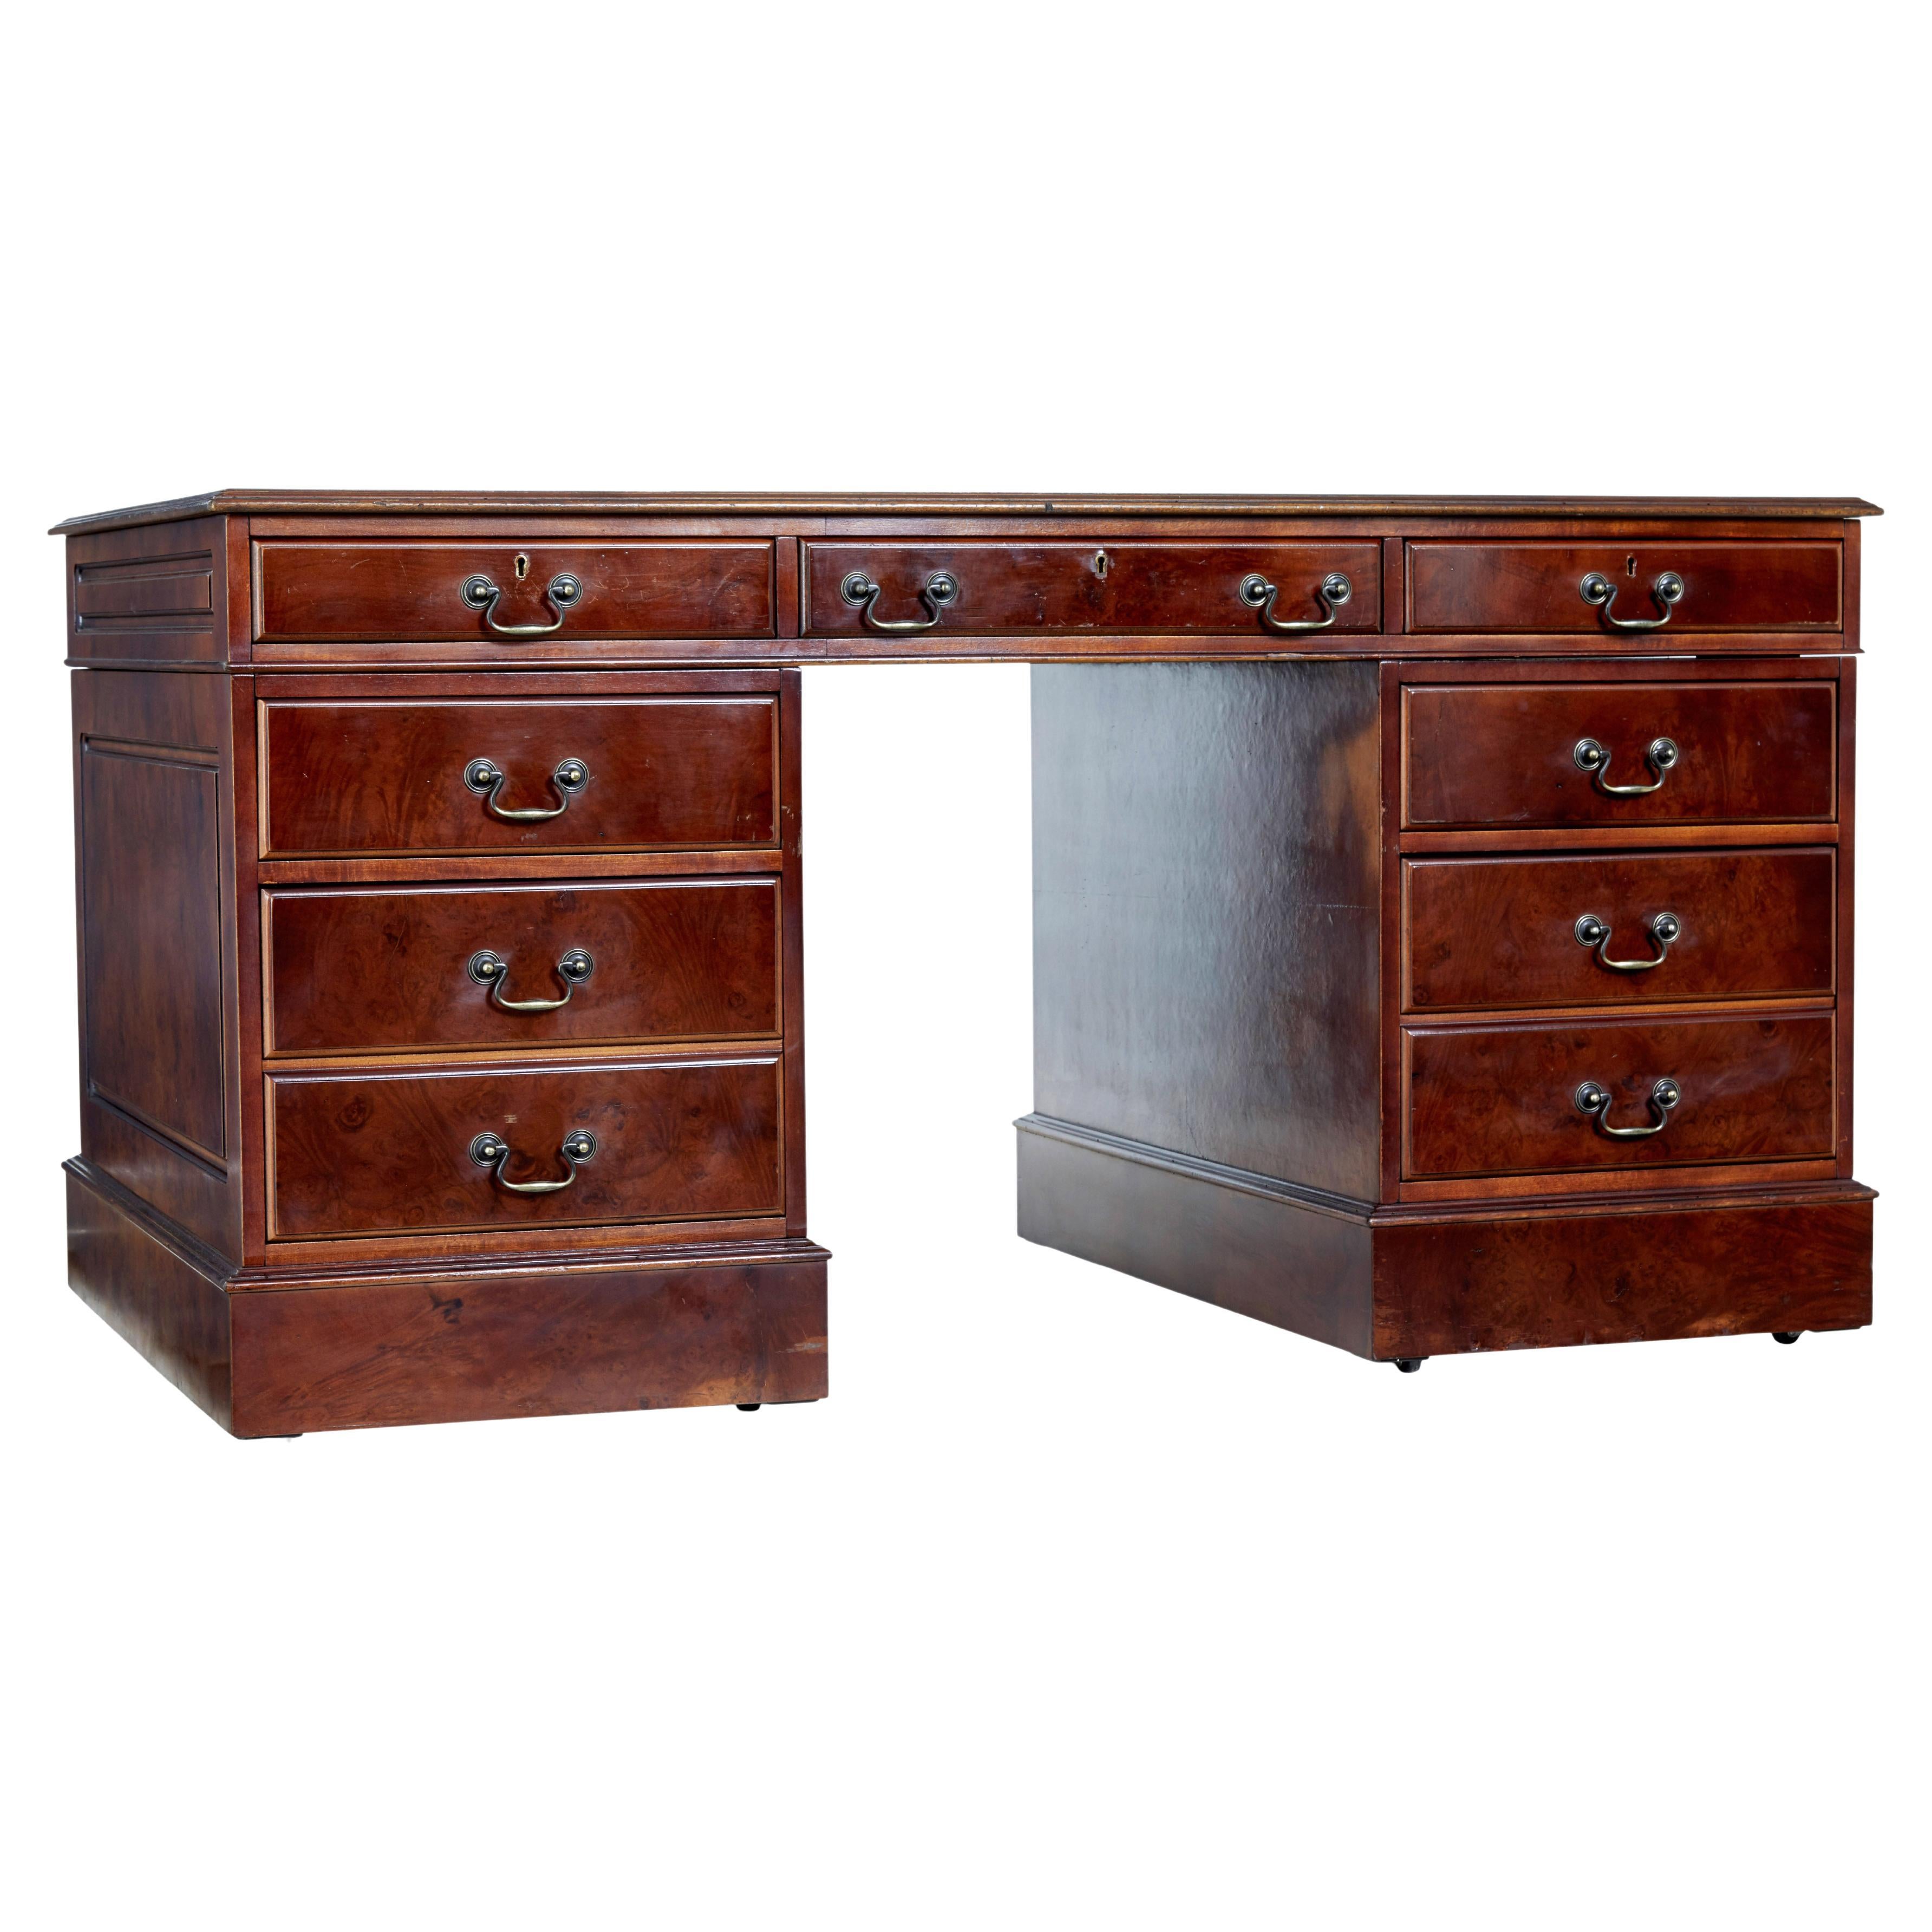 Mahogany and burr leather top pedestal desk